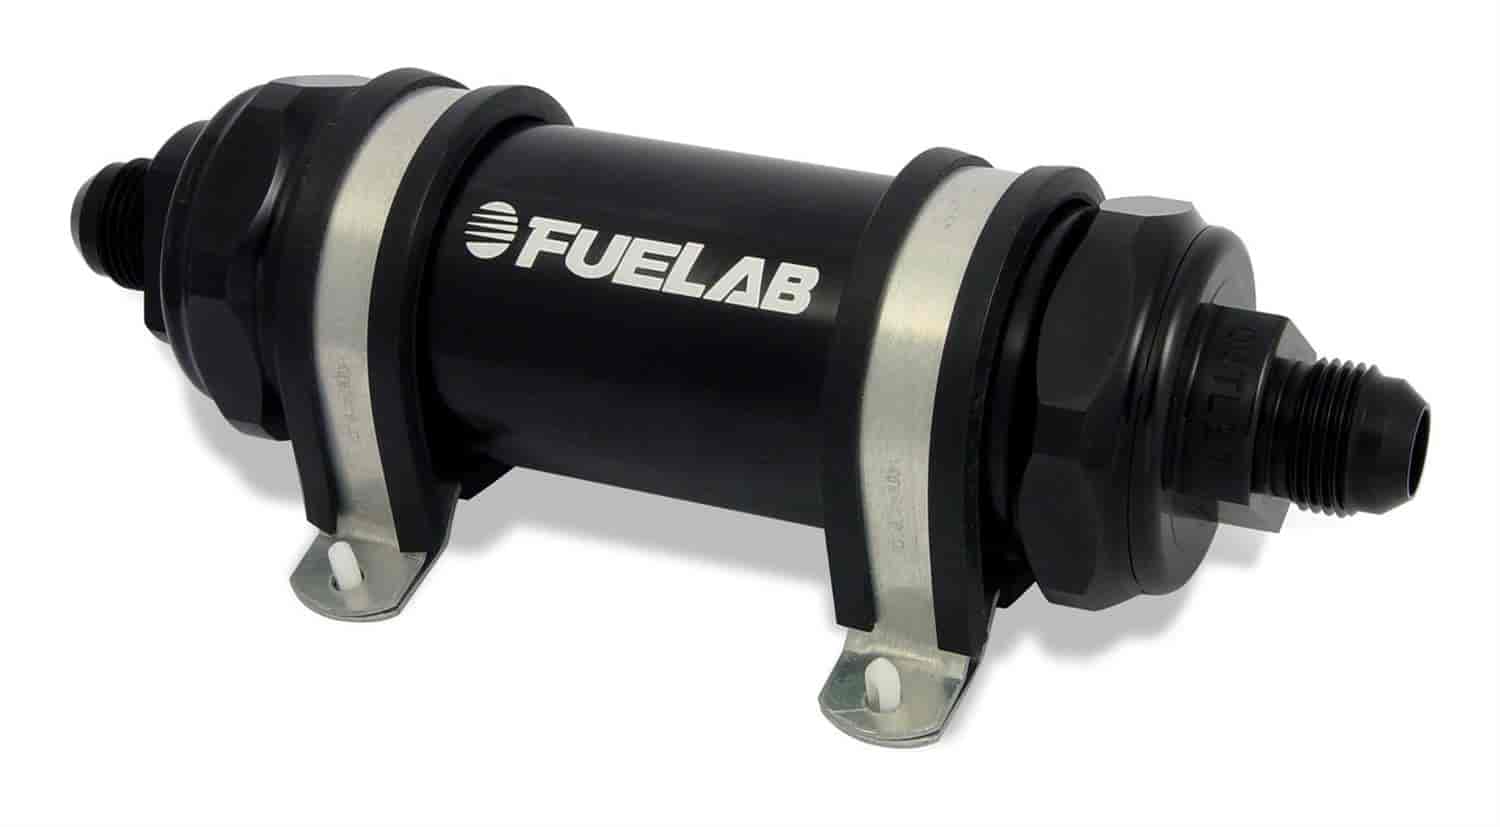 In-Line Fuel Filter Long Length -8AN Inlet/-10AN Outlet 75 micron stainless steel element